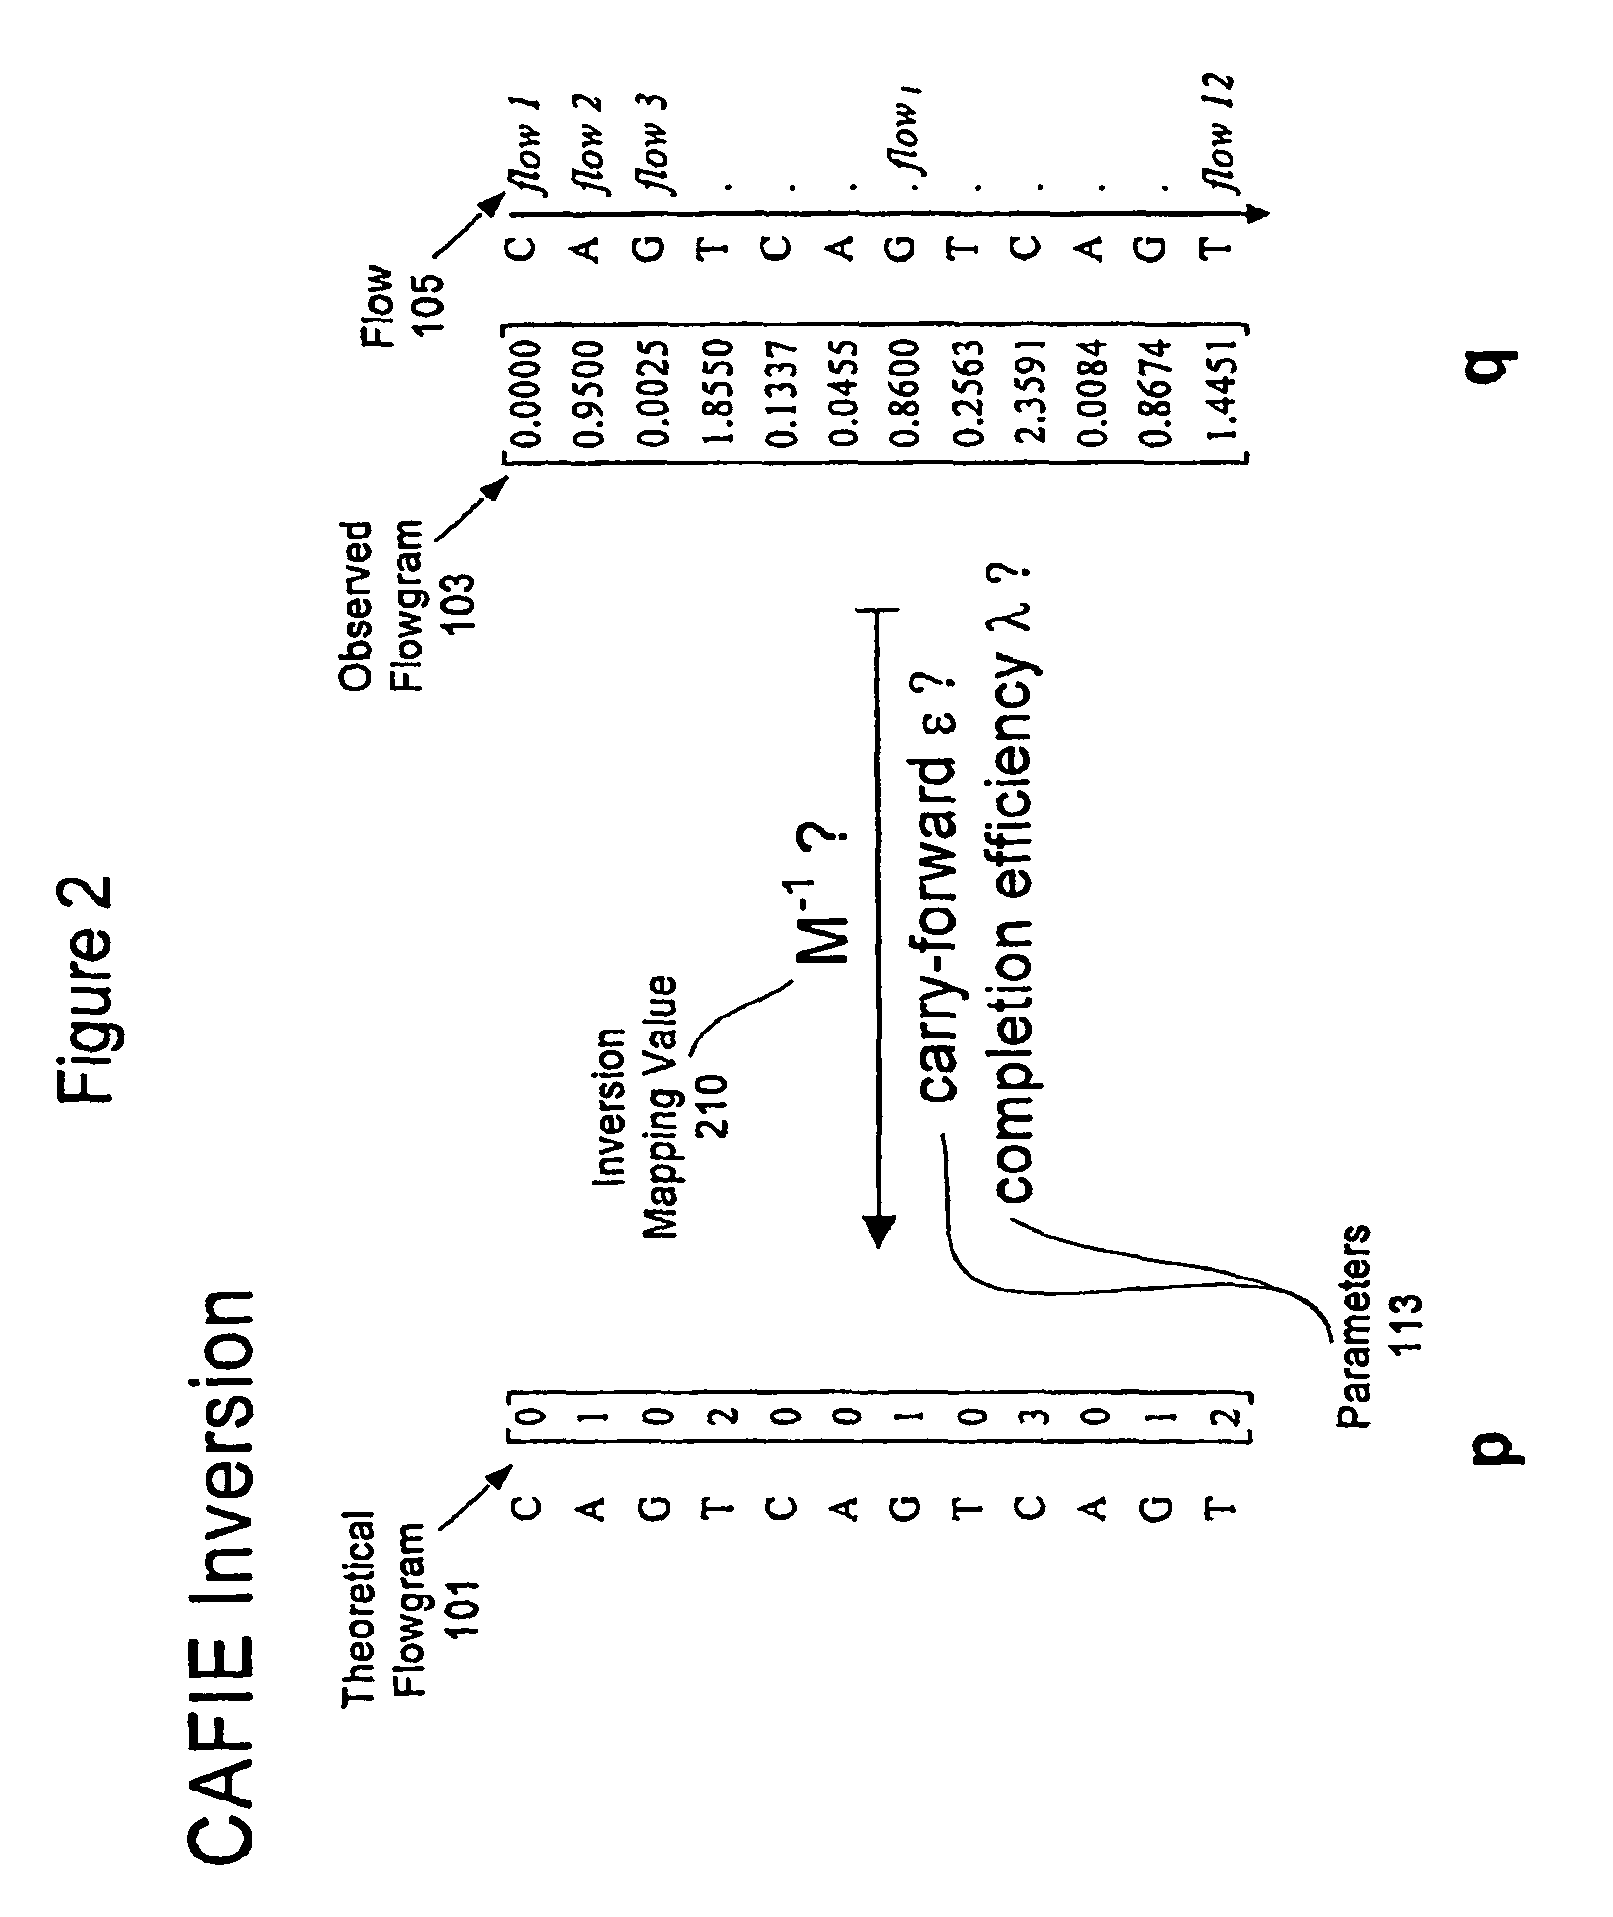 System and method for correcting primer extension errors in nucleic acid sequence data